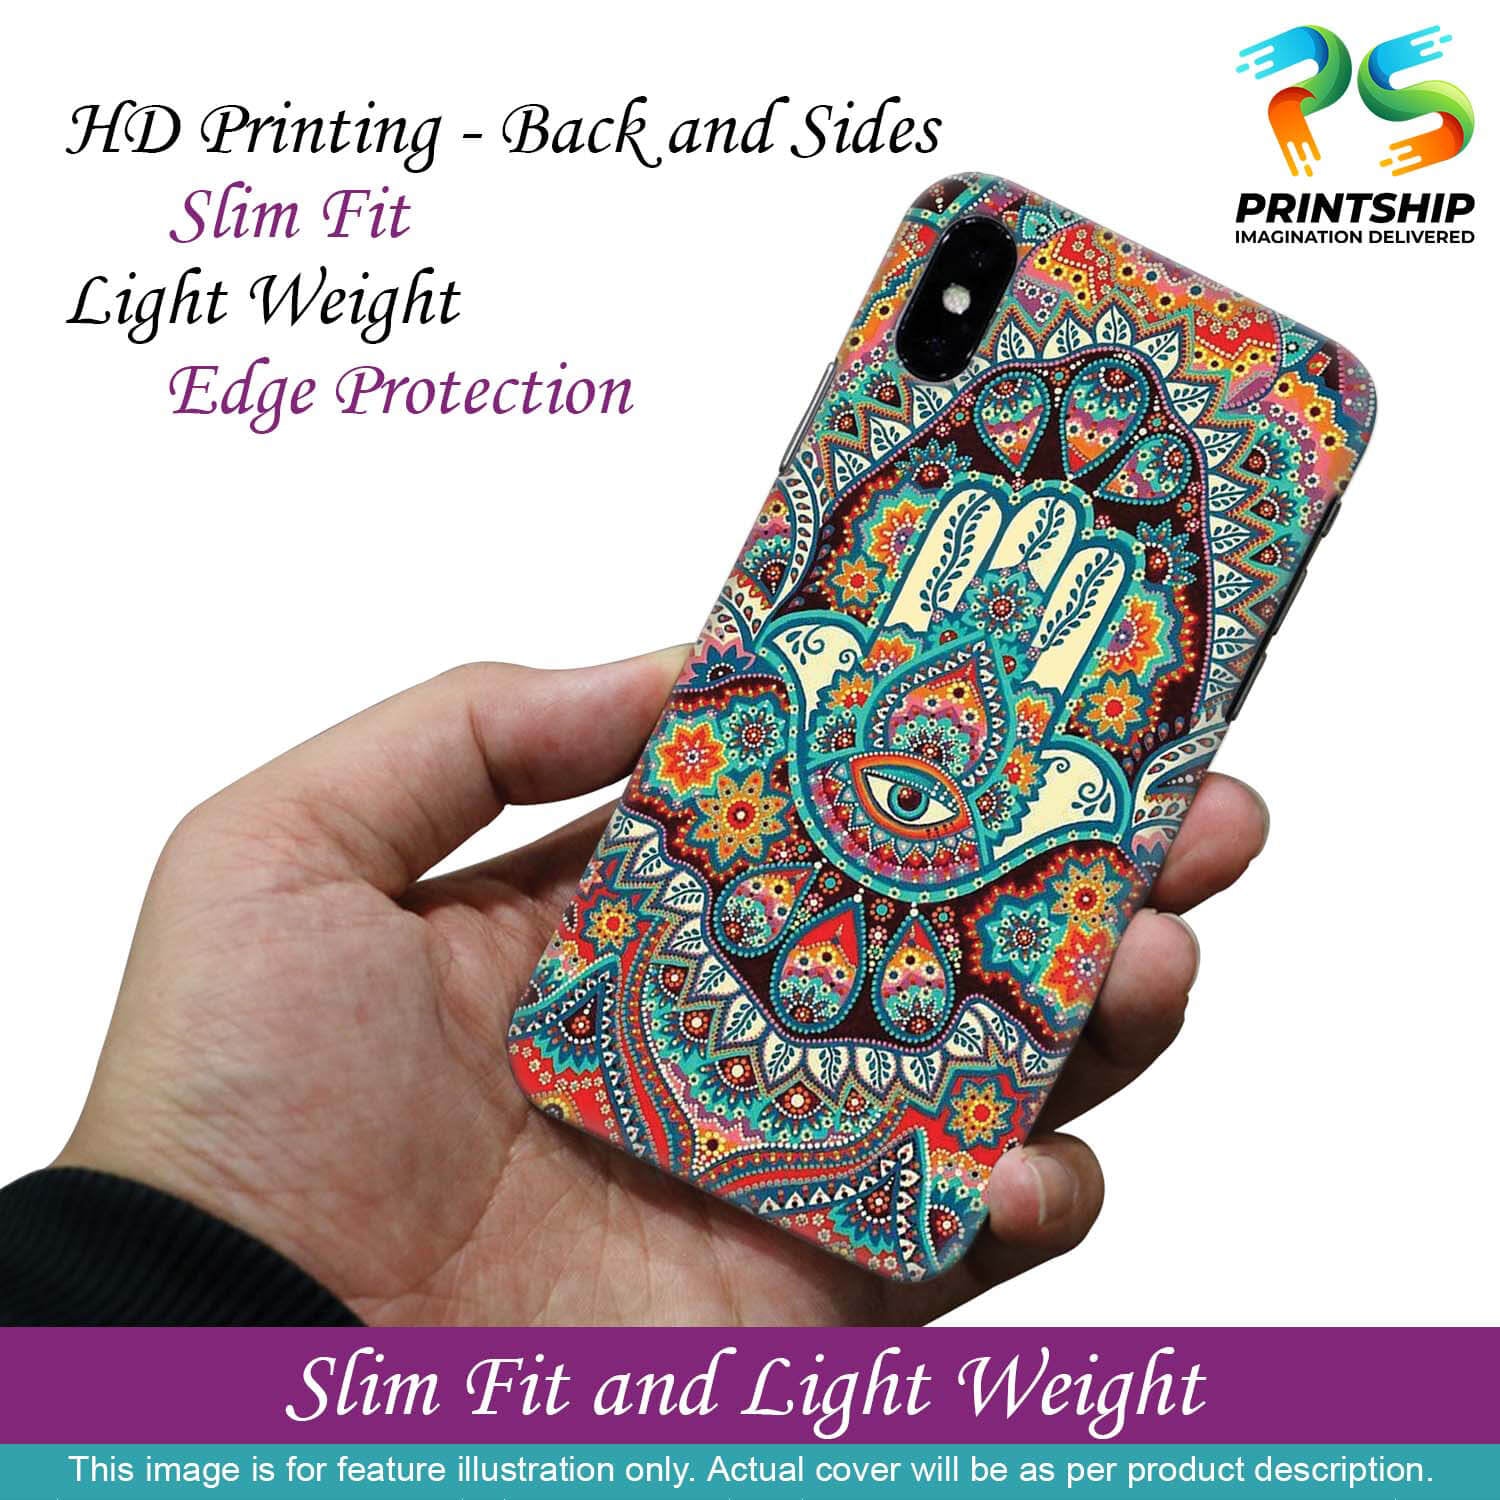 PS1336-Eye Hands Mandala Back Cover for OnePlus 8 Pro